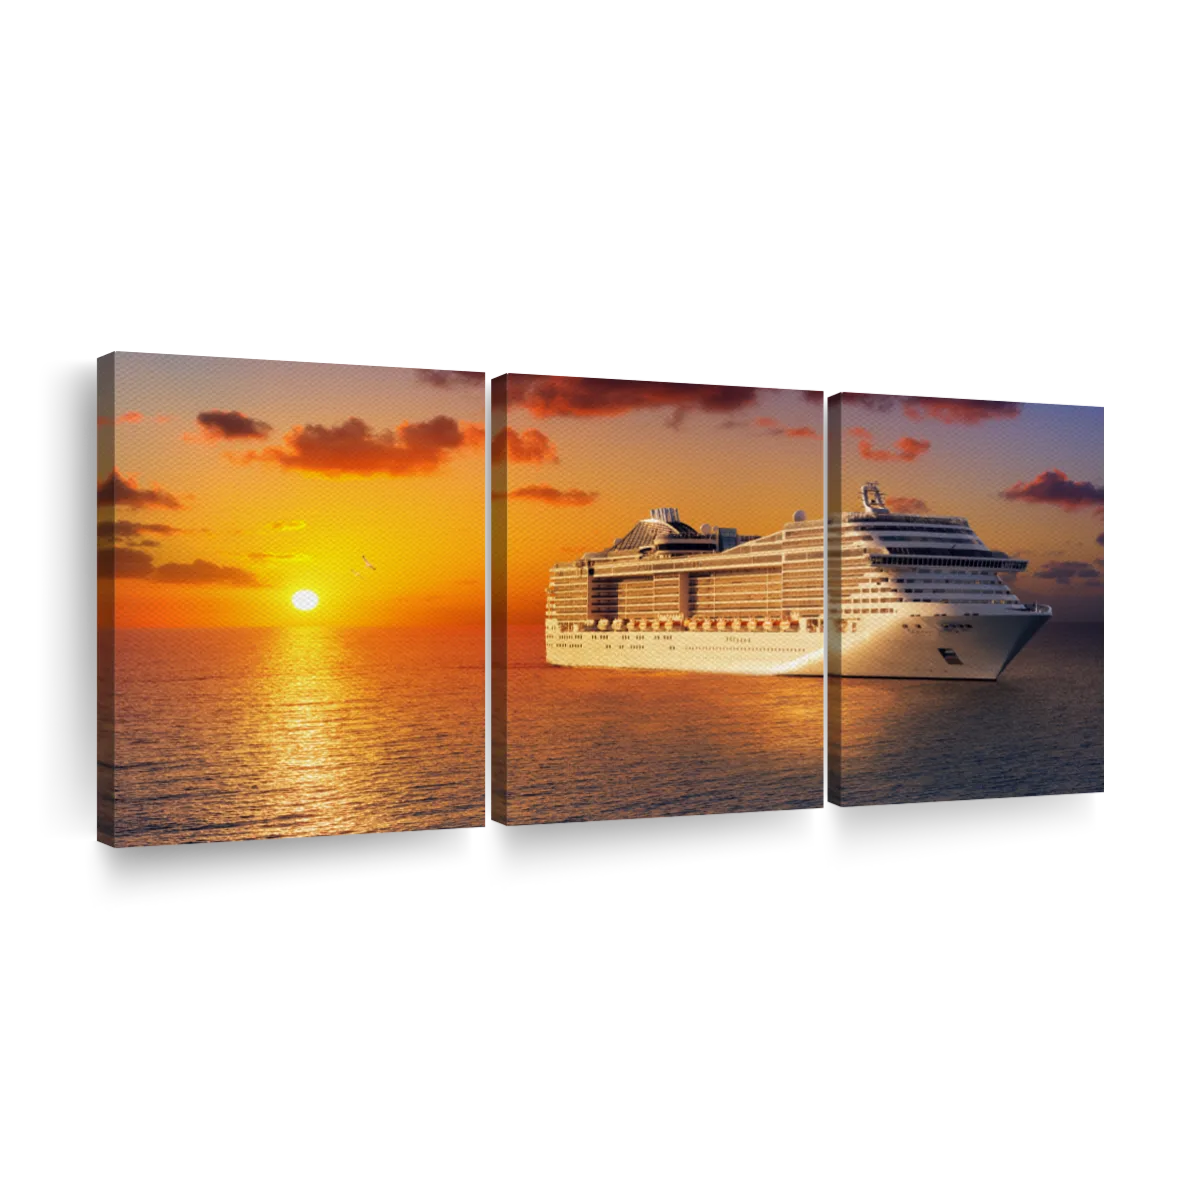 Cruise Ship Tapestry, White Cruise Ship on Water Level on a Clear Day with  Calm Seas and Blue Sky, Wall Hanging for Bedroom Living Room Dorm Decor,  40W X 60L Inches, Blue